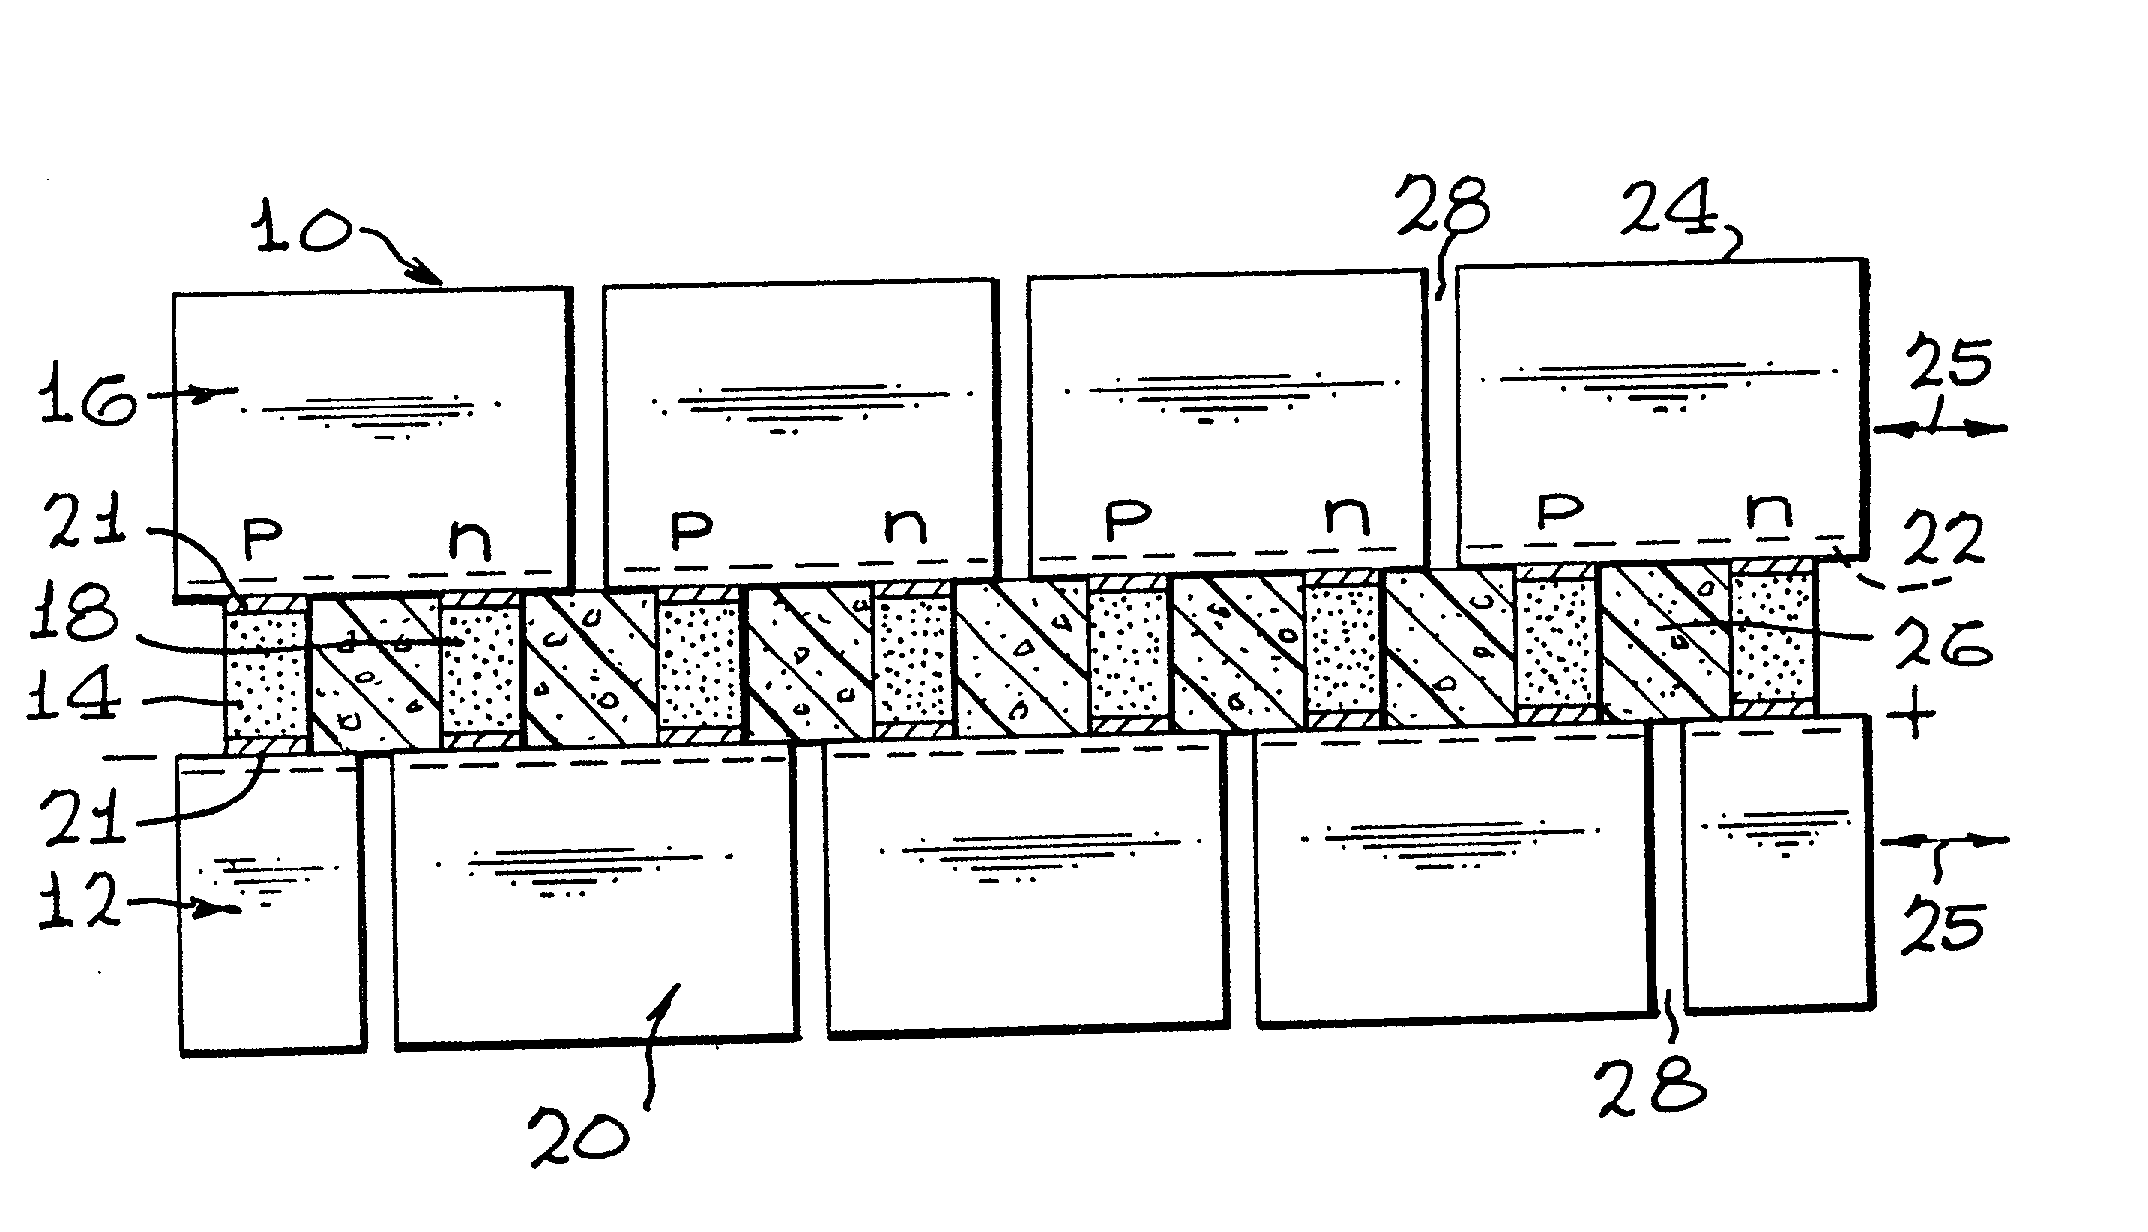 Modular thermoelectric couple and stack